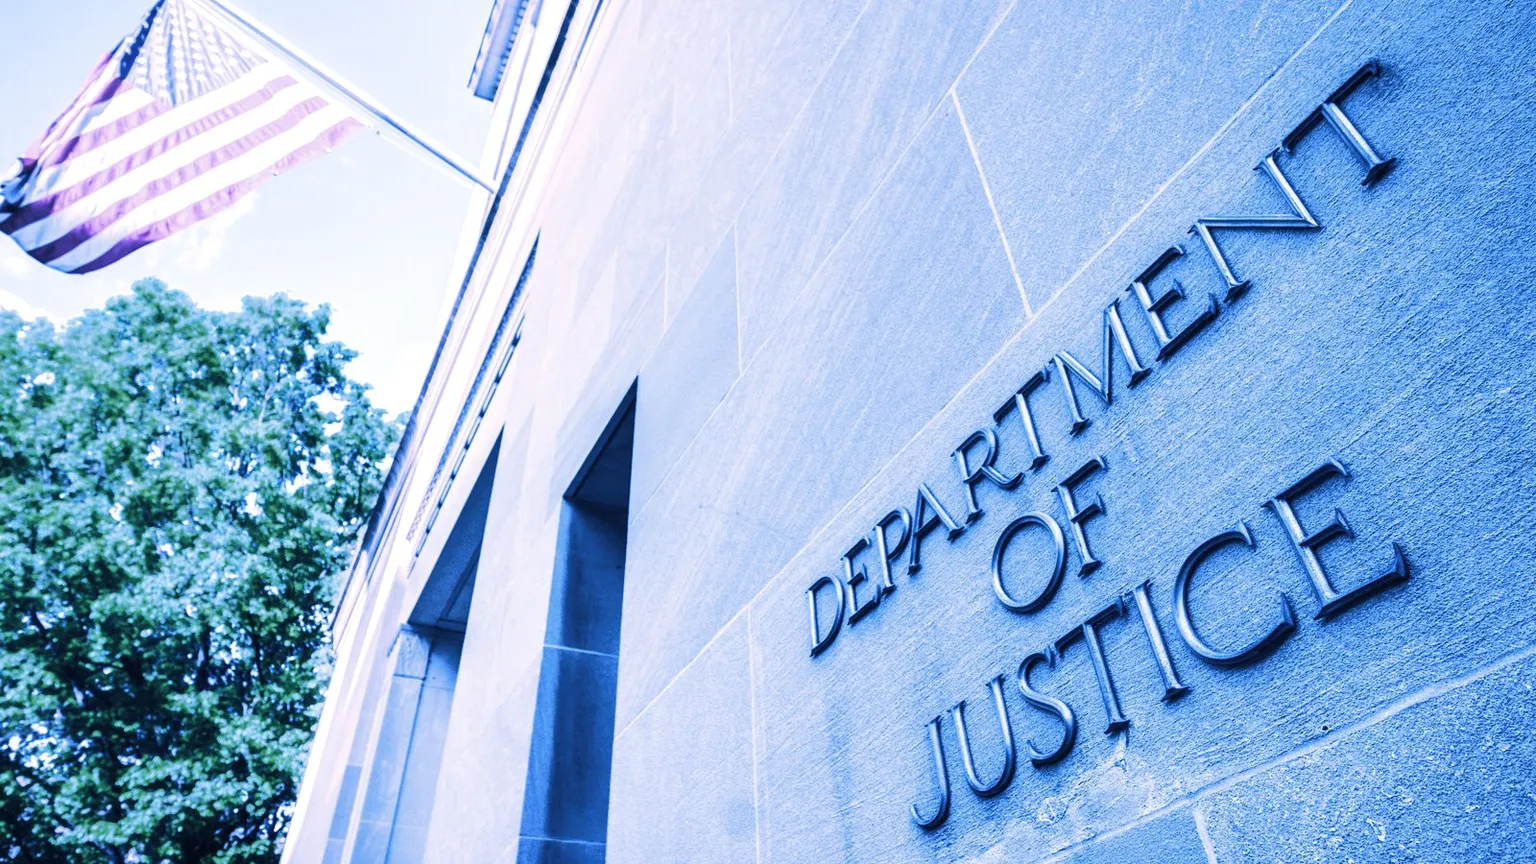 Department of Justice. Image: Shutterstock